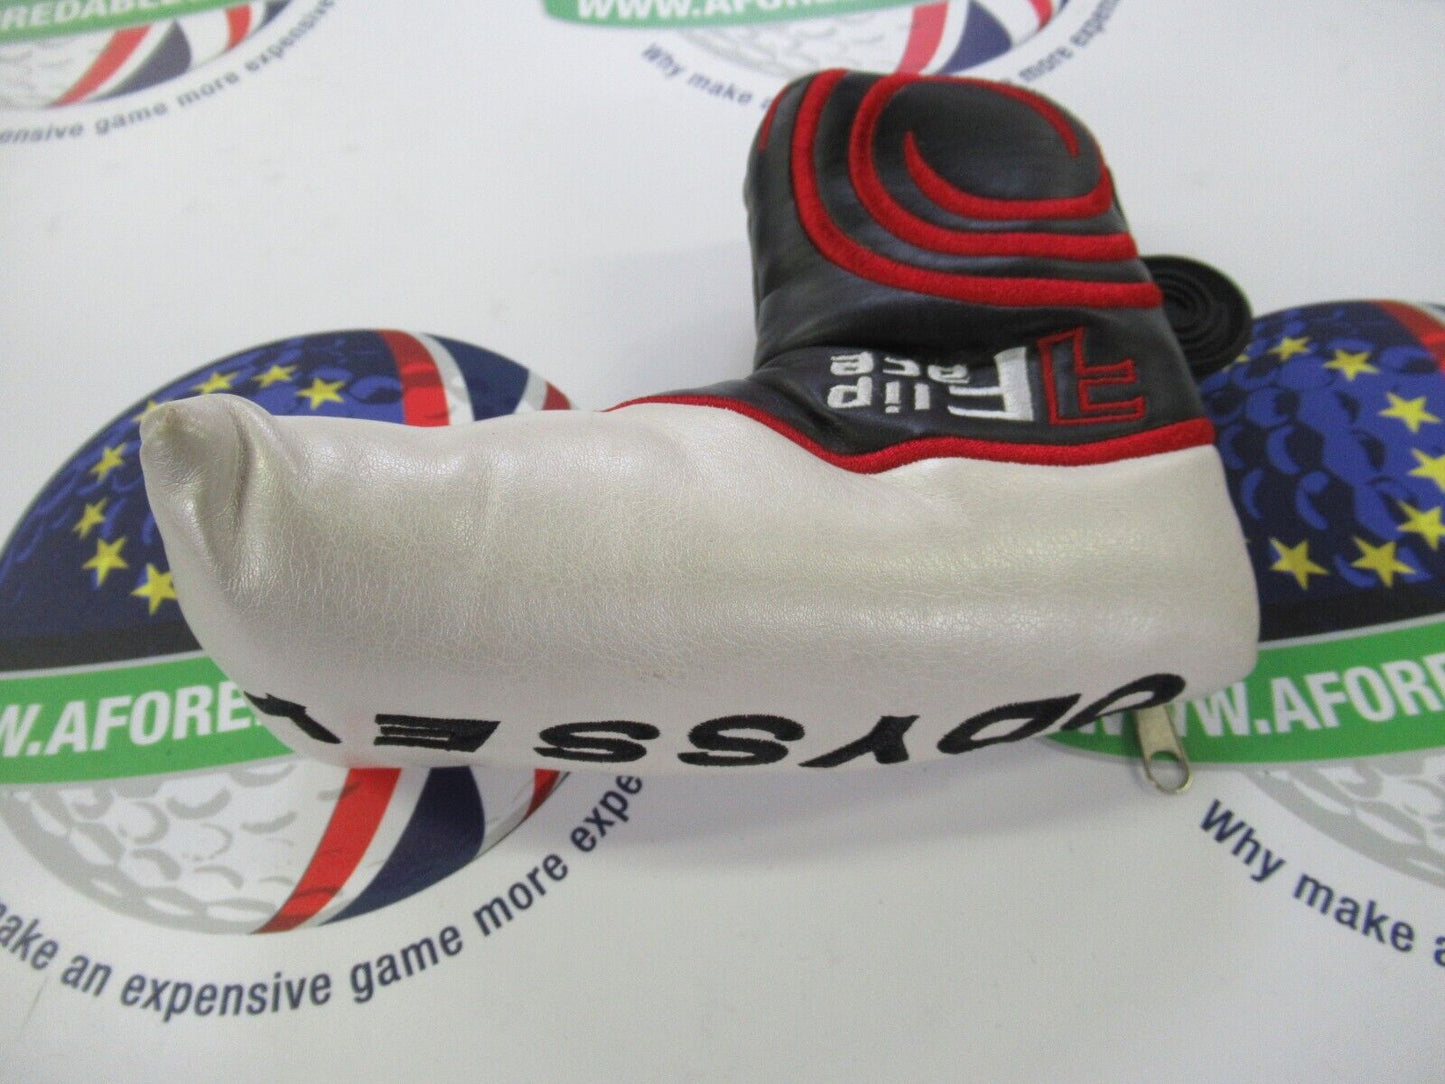 new odyssey flip face putter cover